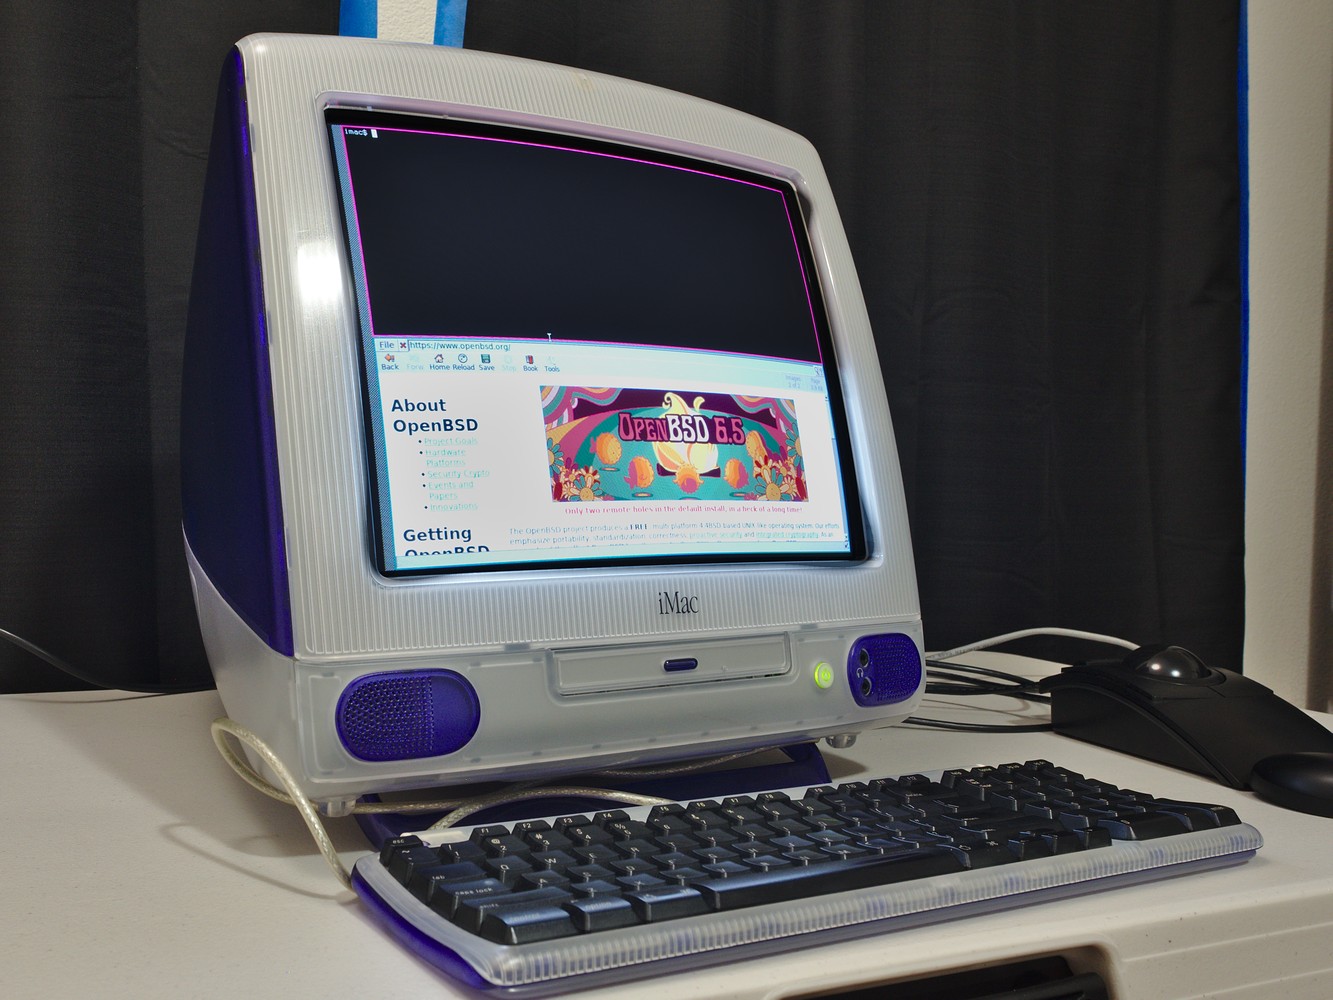 iMac G3 on a desk; screen shows the
minimalist cwm window manager and single dillo browser window.